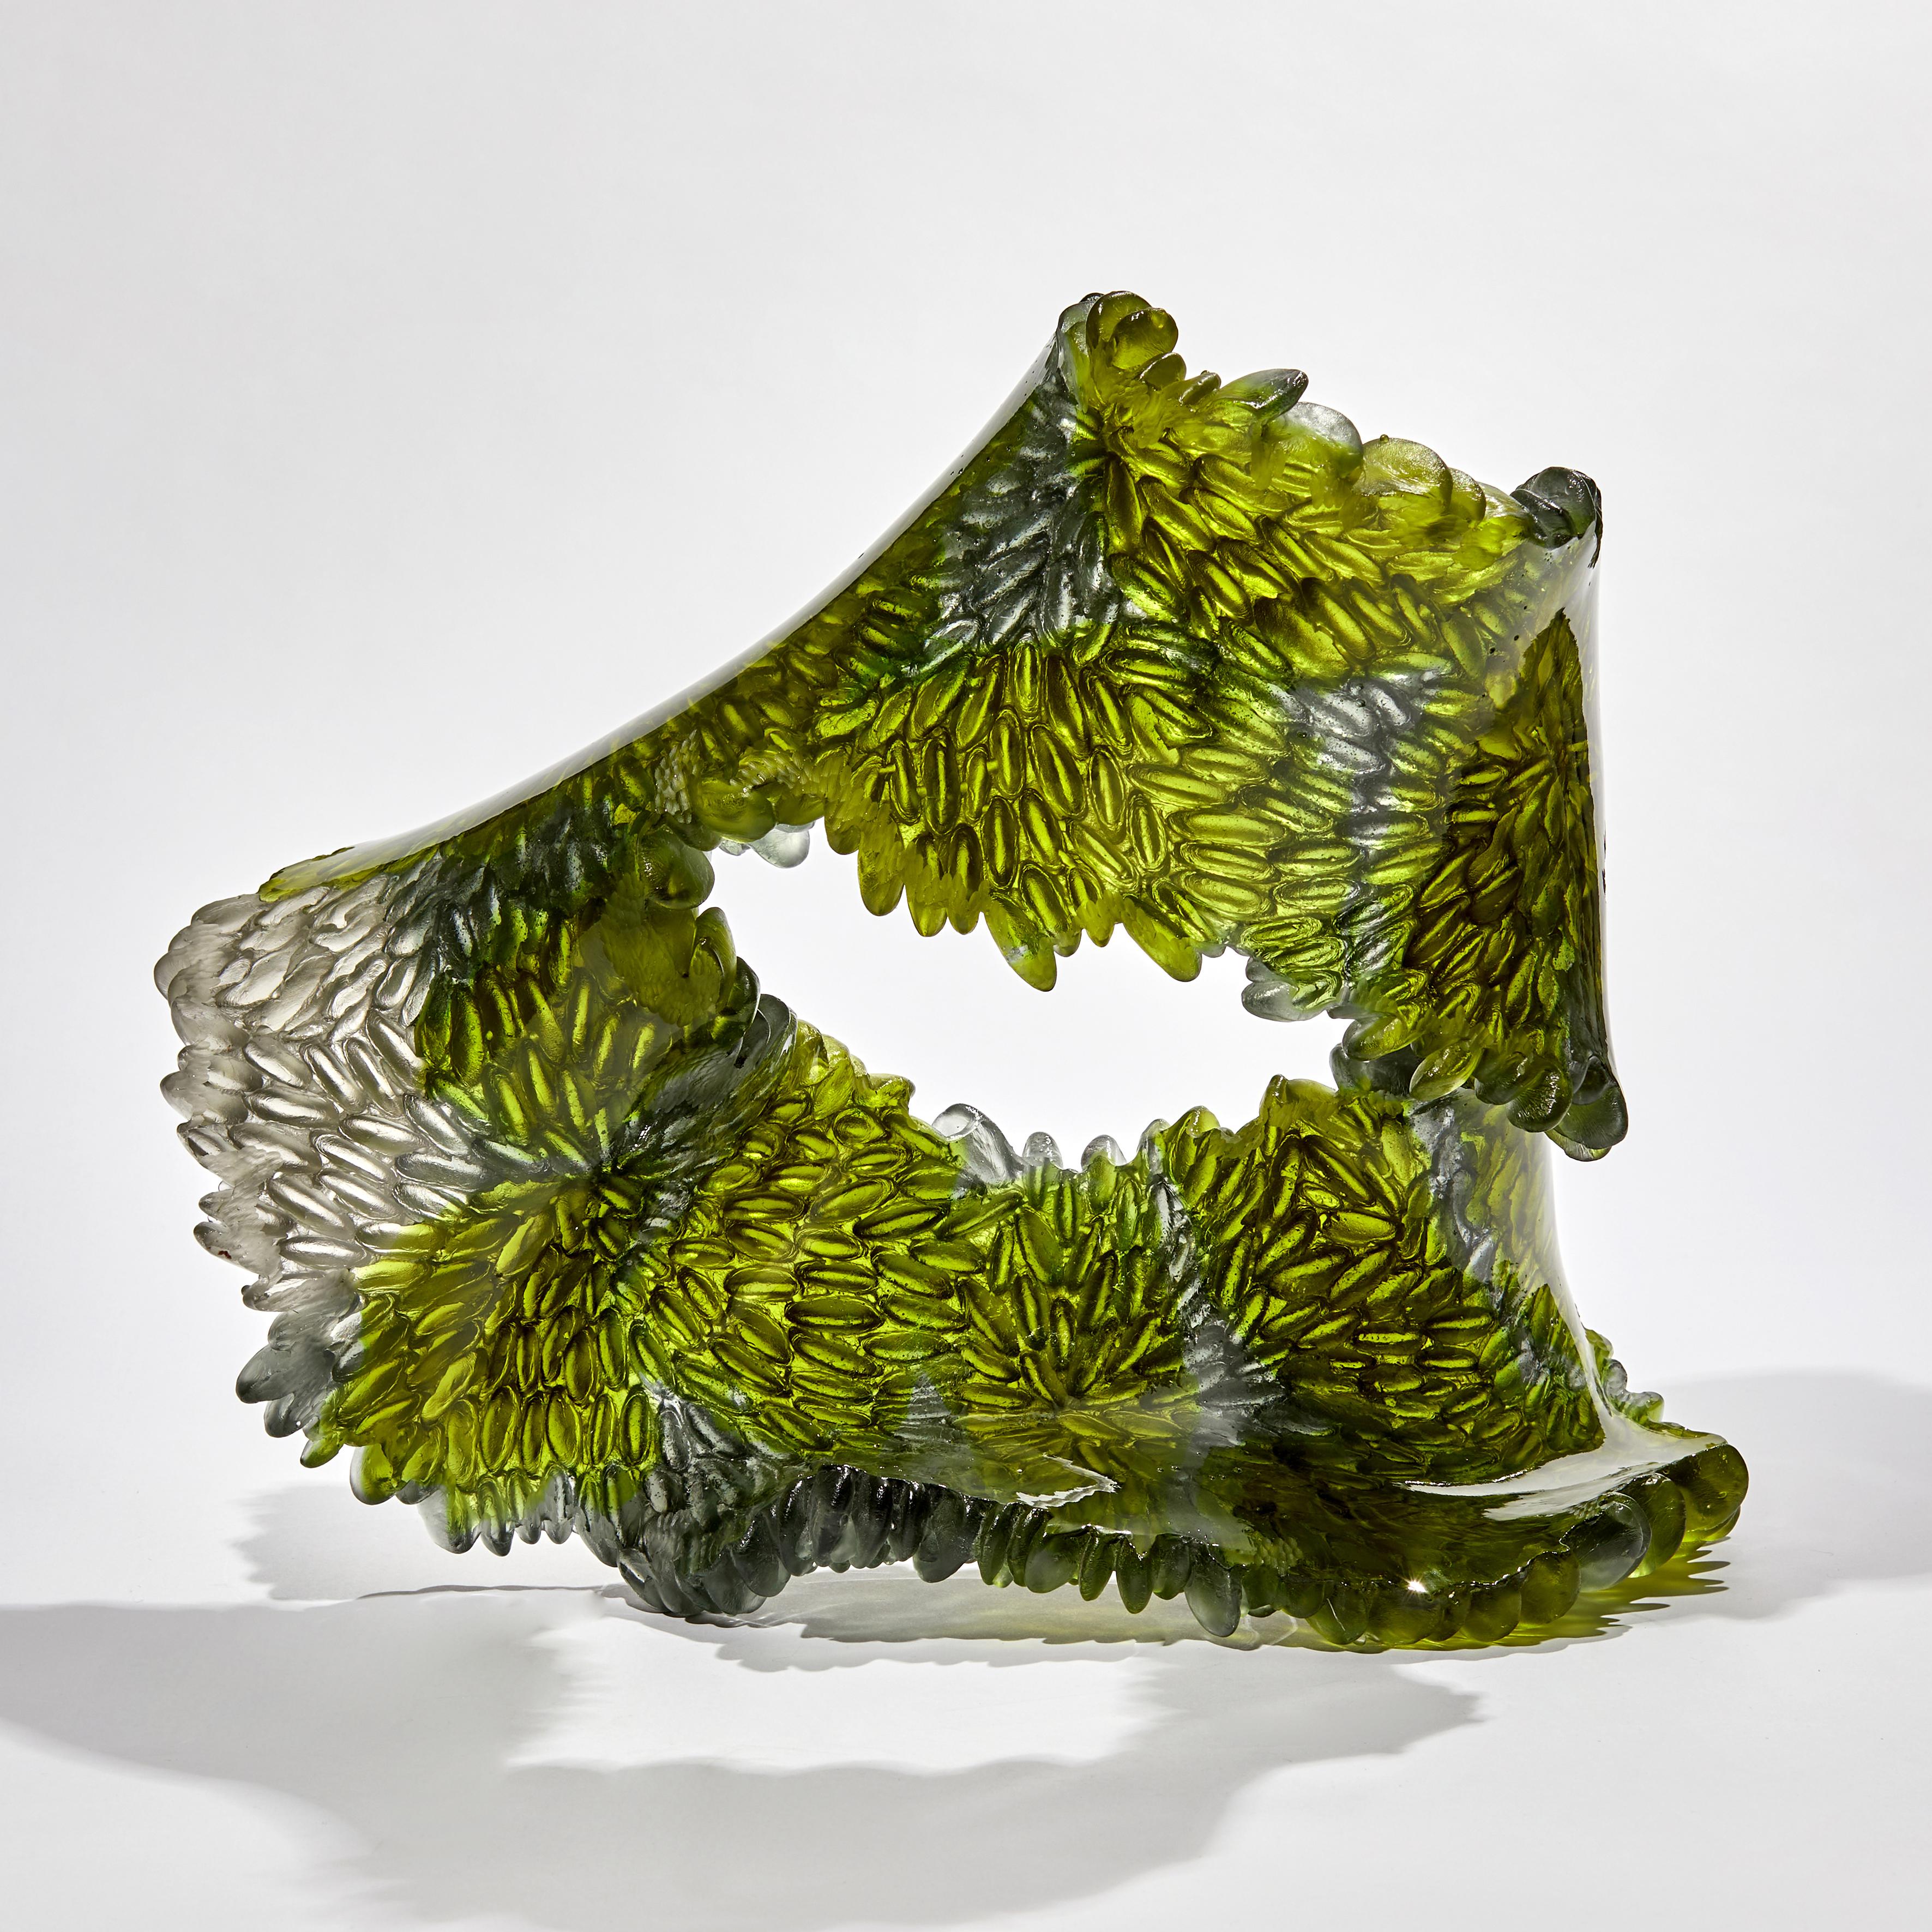 British Green Oval, Unique Glass Sculpture in Olive Green & Grey by Nina Casson McGarva